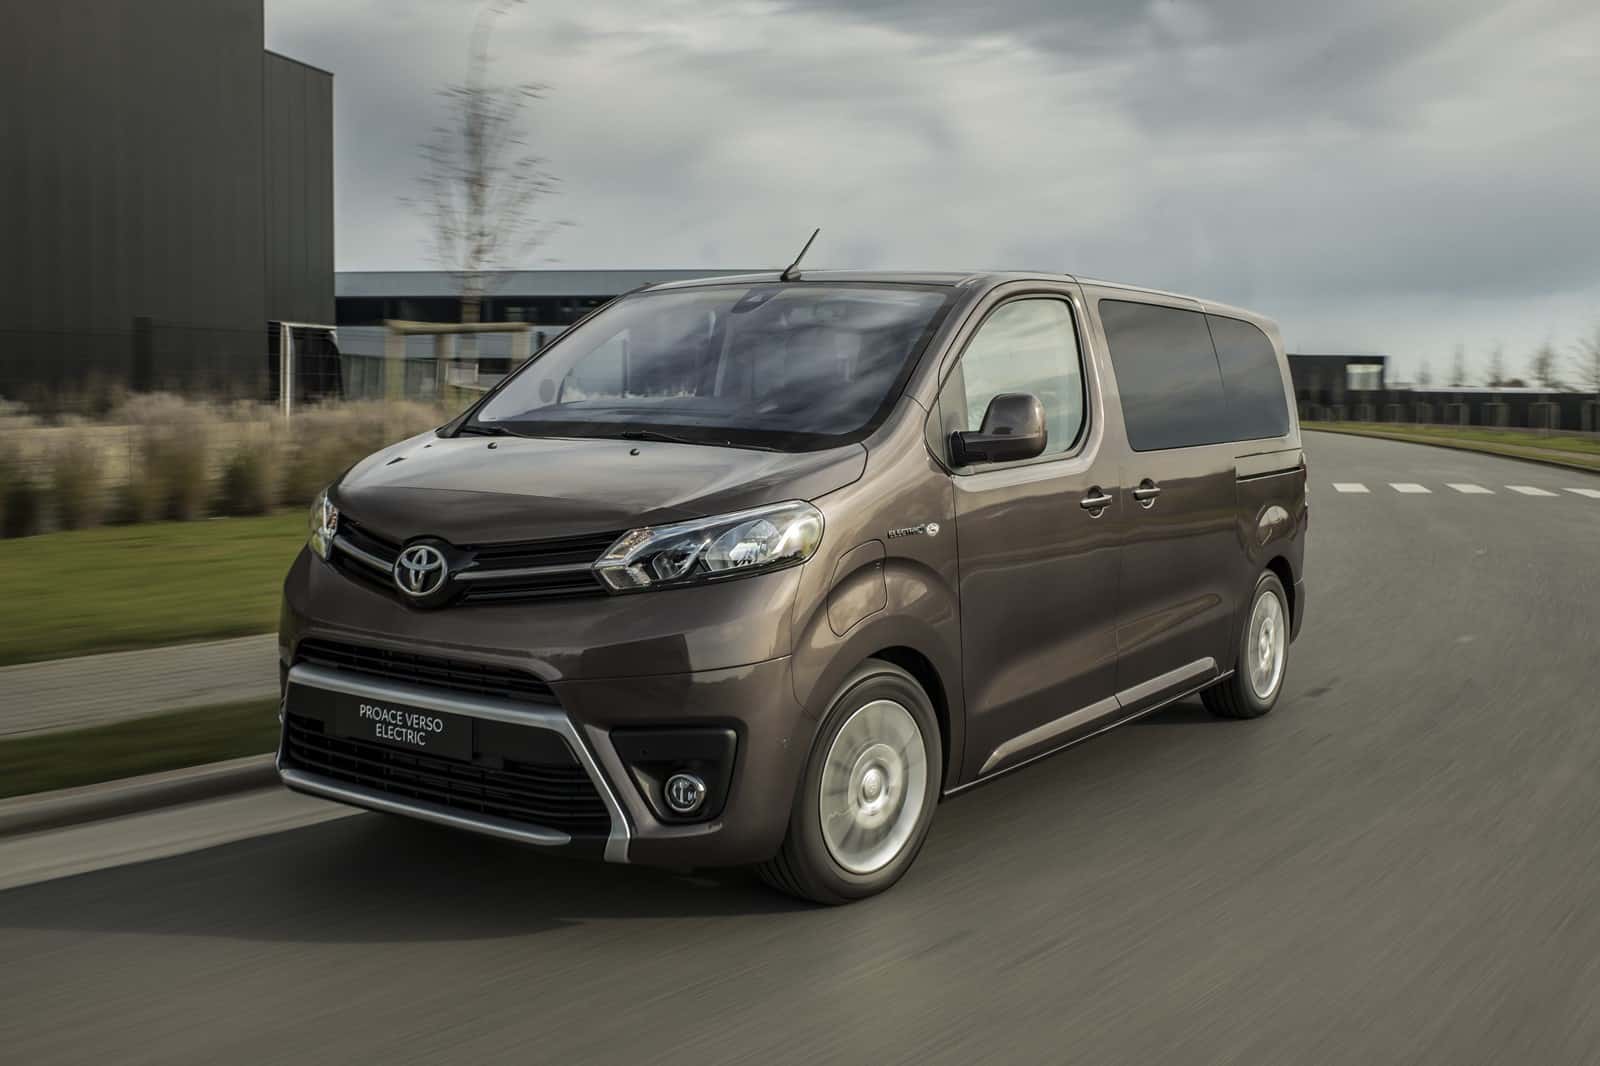 The Toyota Proace sneaks into the calls for review